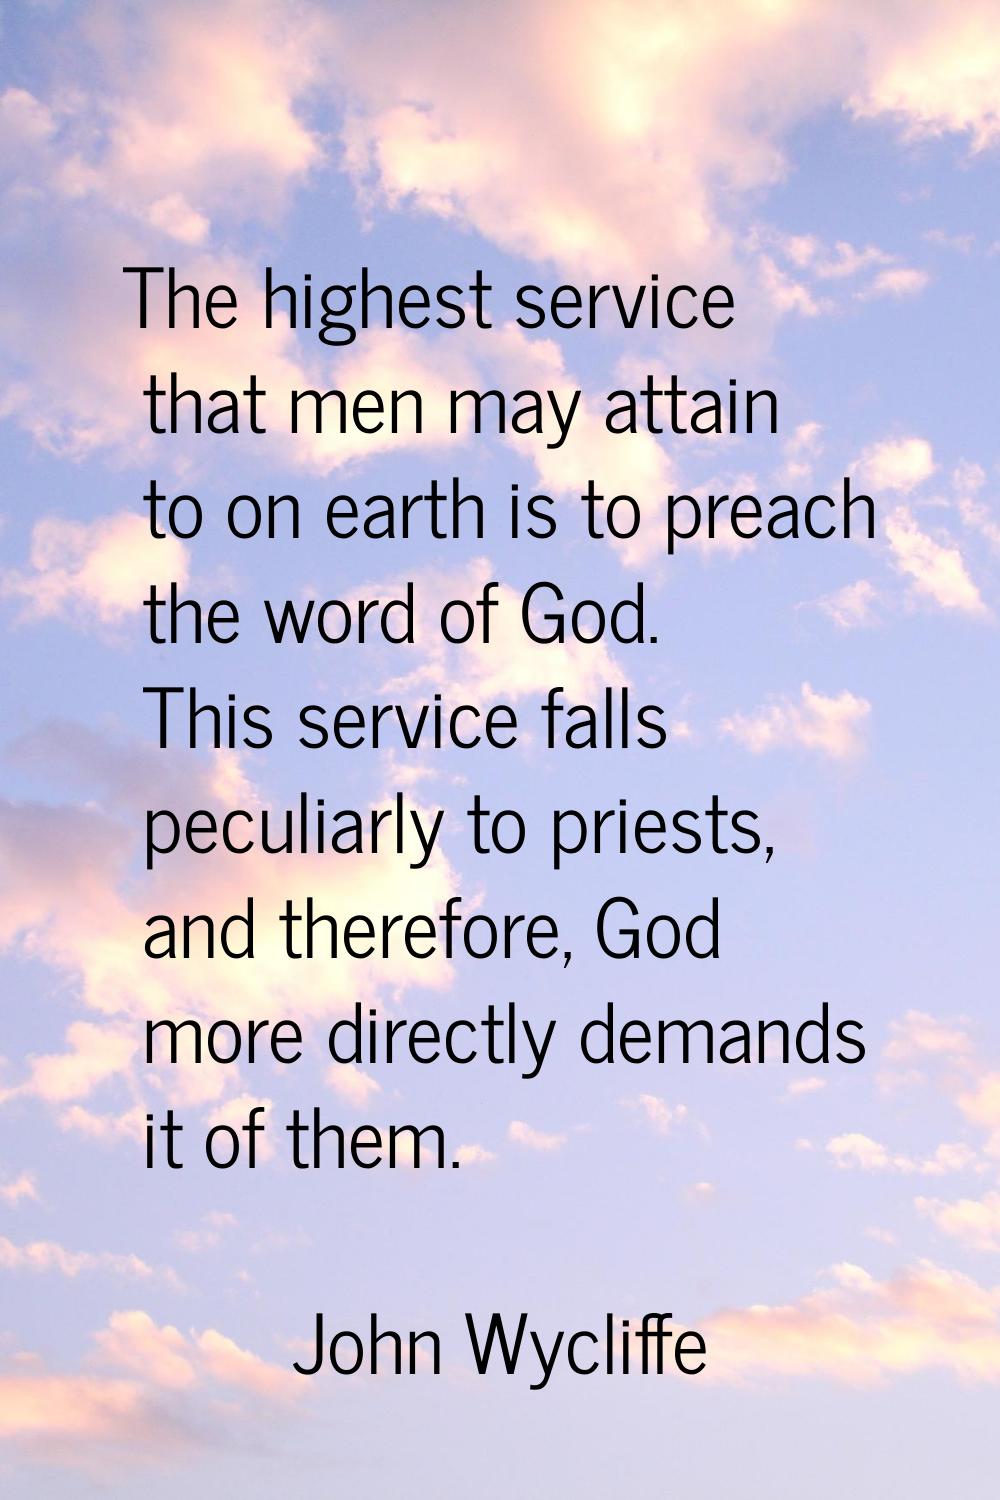 The highest service that men may attain to on earth is to preach the word of God. This service fall